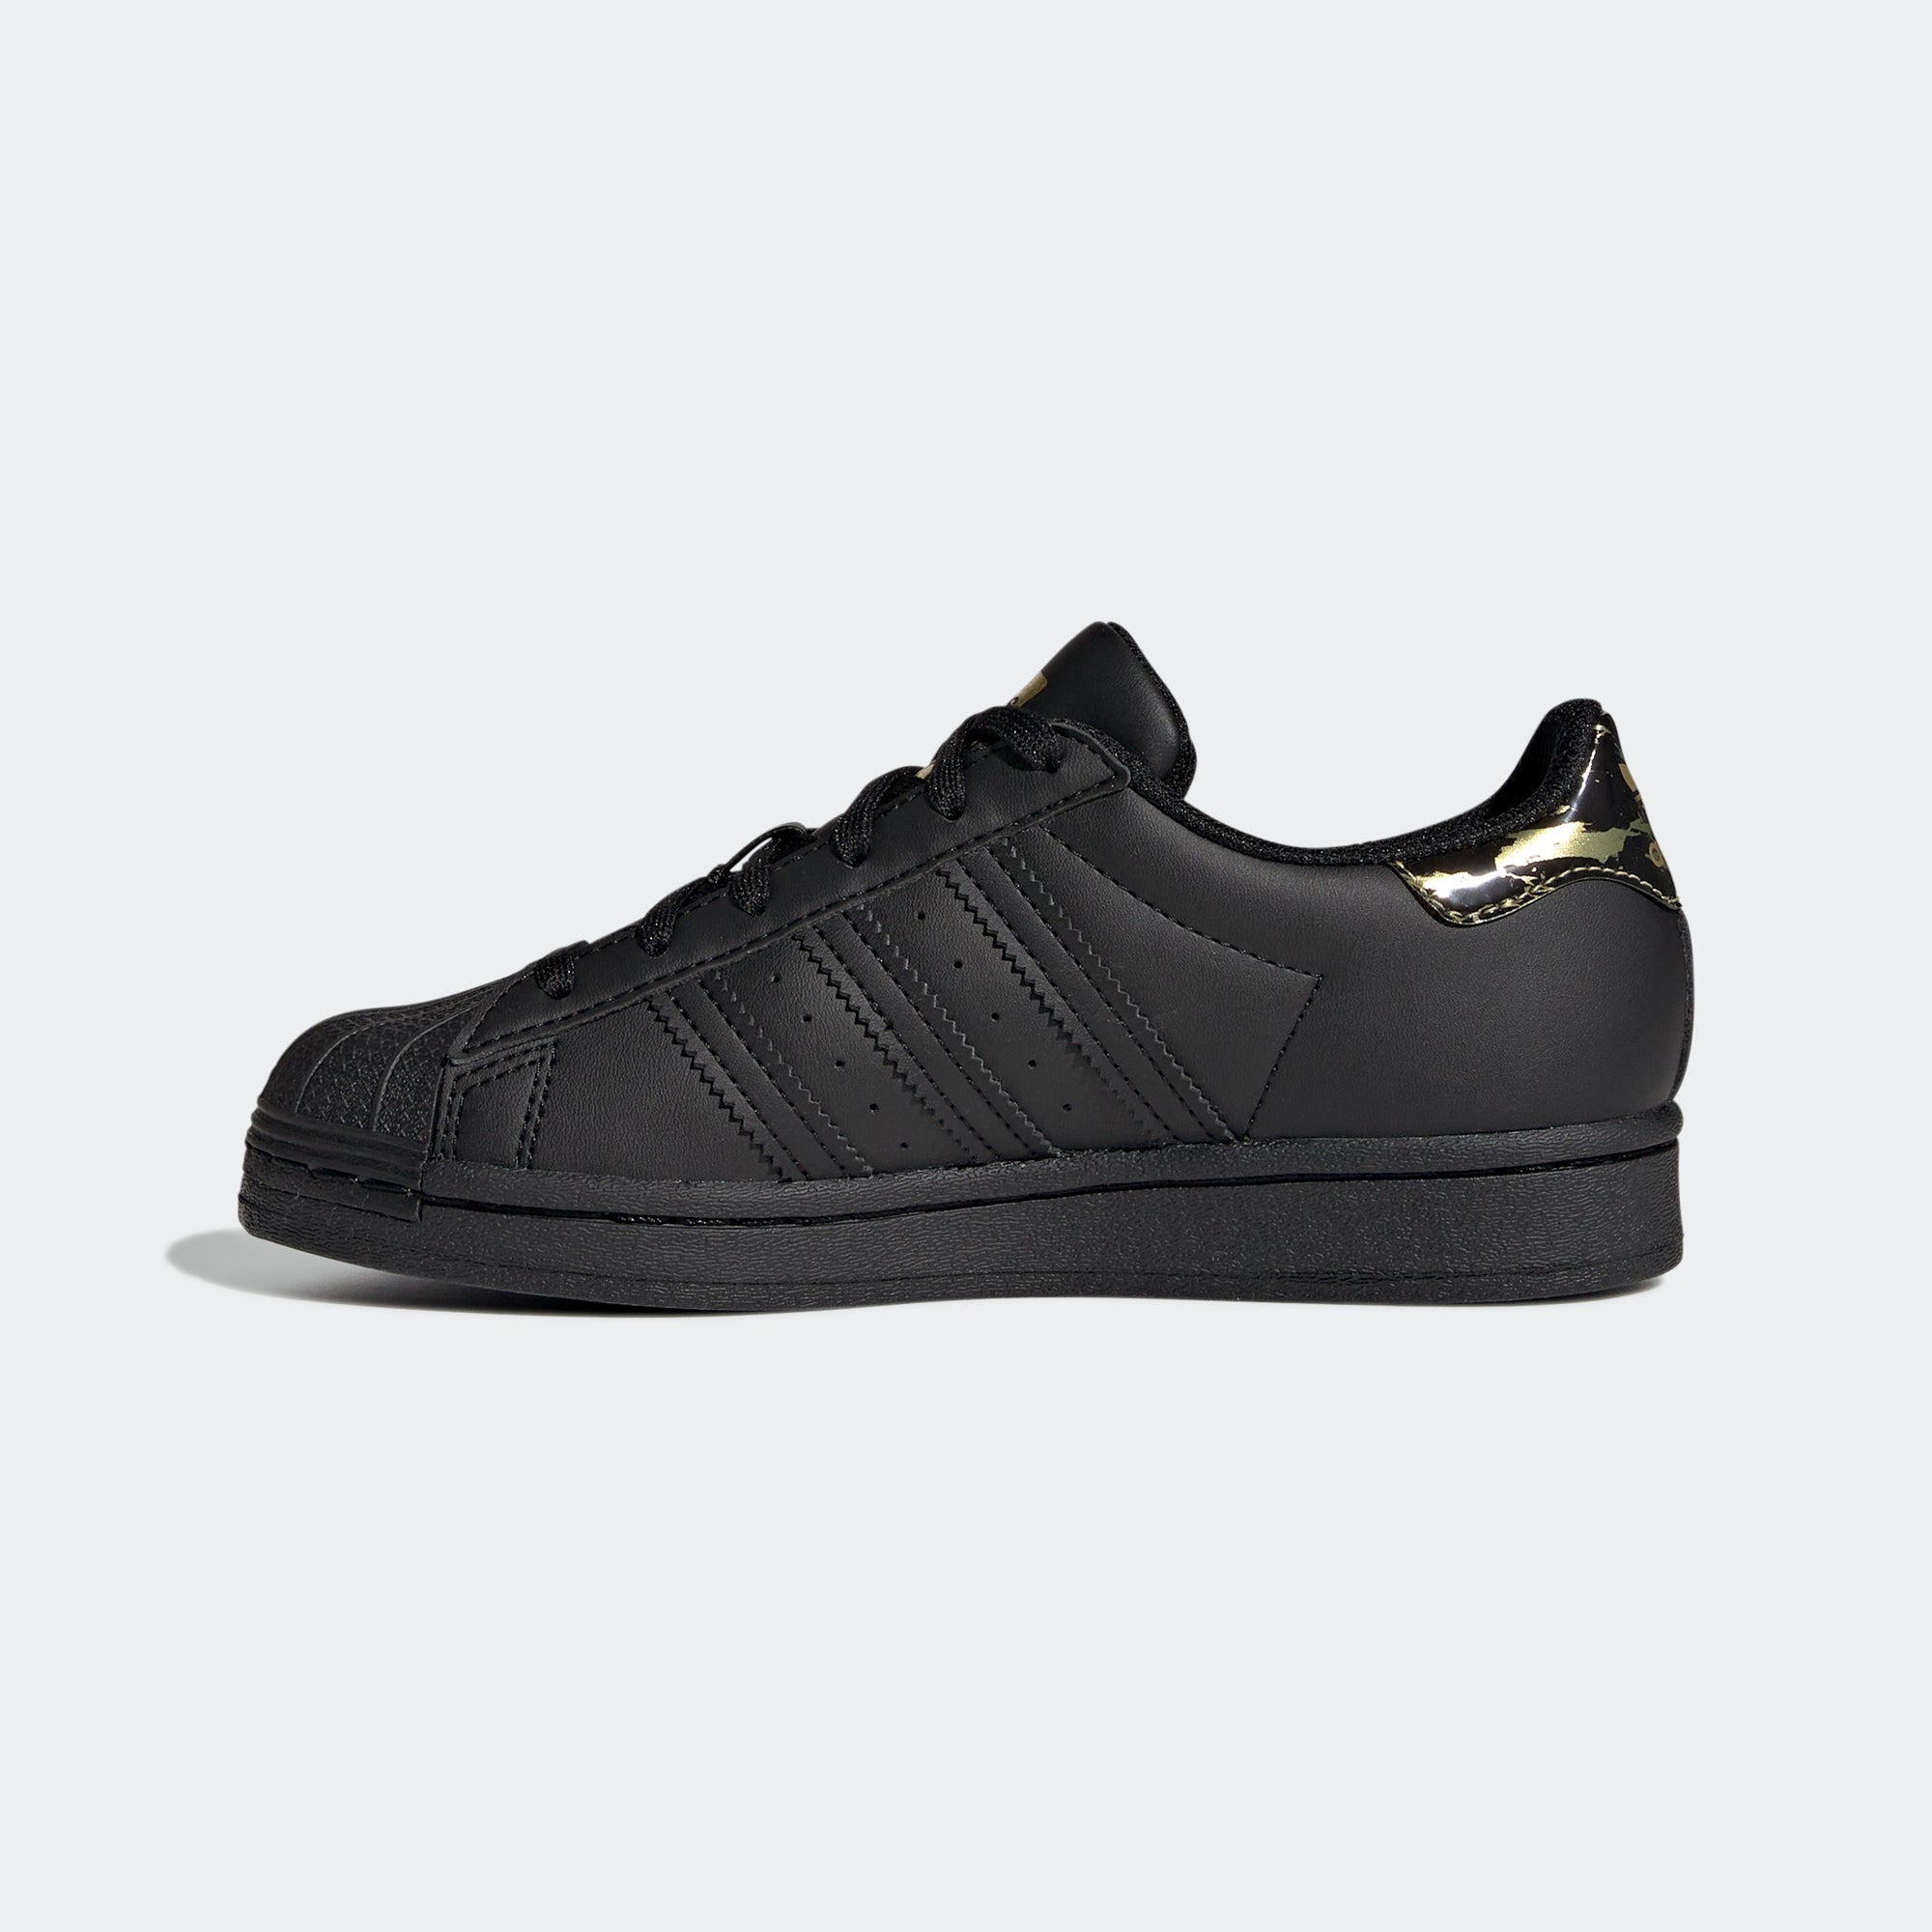 Adidas Superstar II GS Youth Shell Toe Black Gold Sneakers 662295 Women's  NEW